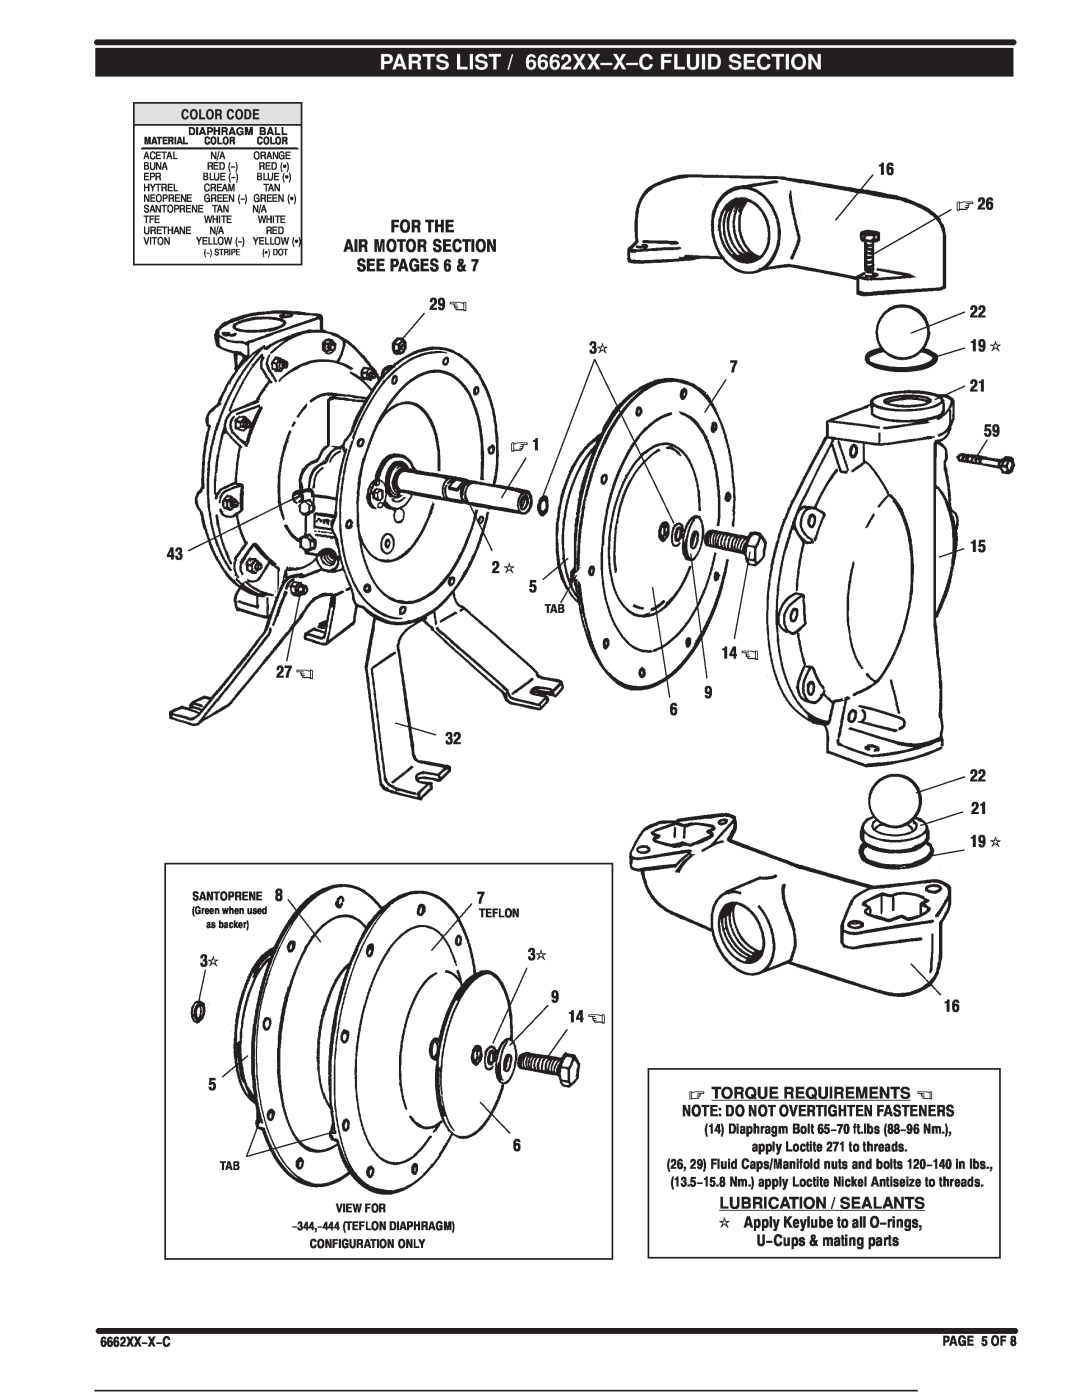 Ingersoll-Rand 6662XX-X-C manual PARTS LIST / 6662XX±X±C FLUID SECTION, FOR THE AIR MOTOR SECTION SEE PAGES 6 & 29 3k 